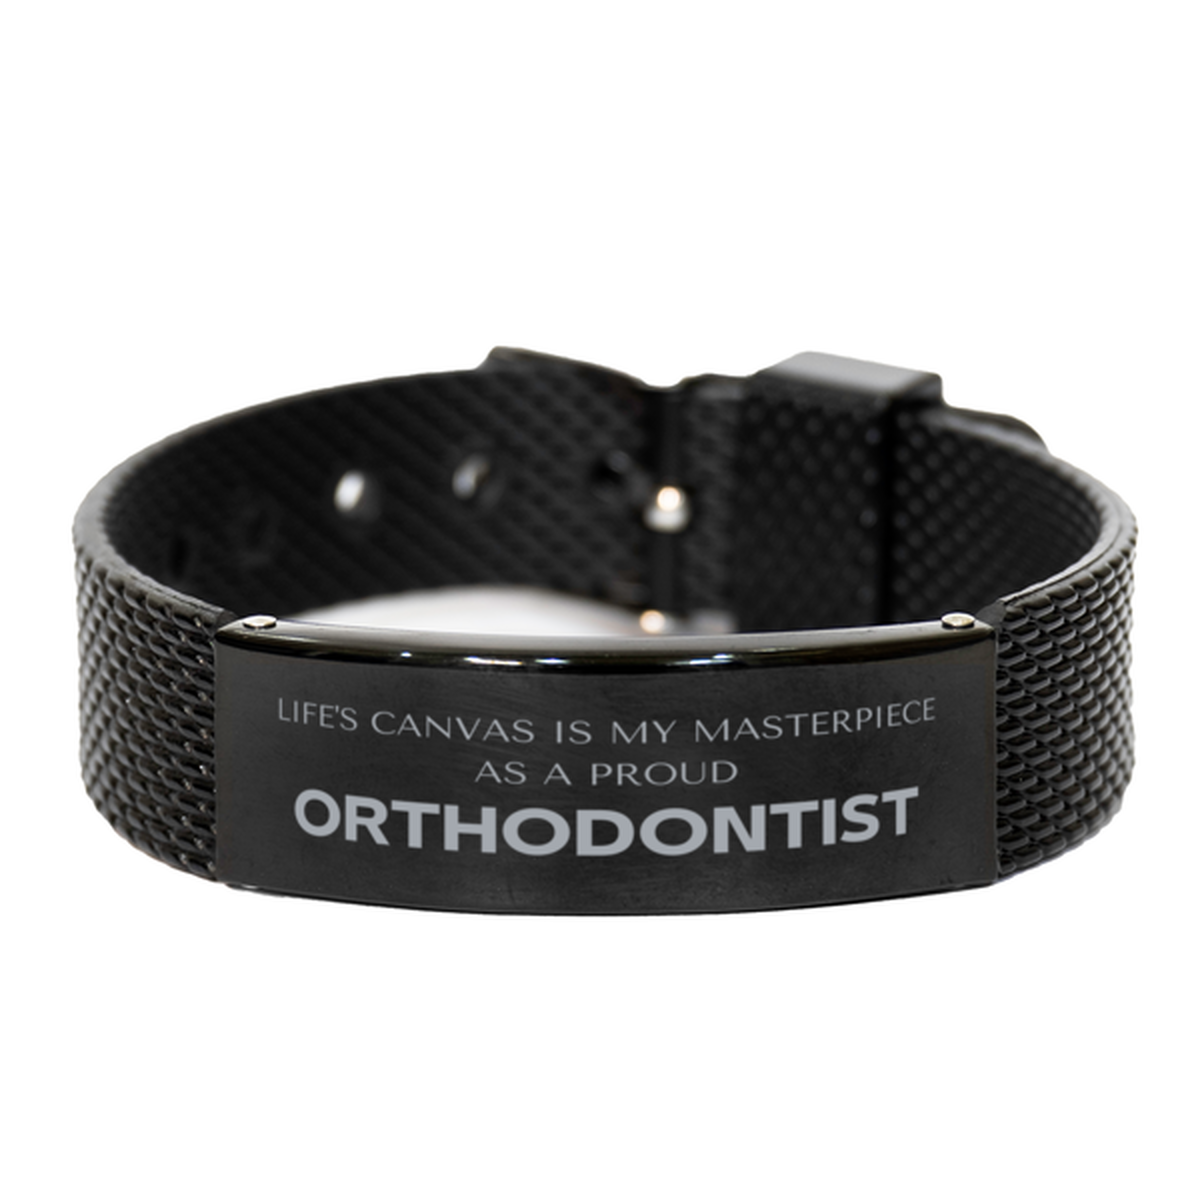 Proud Orthodontist Gifts, Life's canvas is my masterpiece, Epic Birthday Christmas Unique Black Shark Mesh Bracelet For Orthodontist, Coworkers, Men, Women, Friends